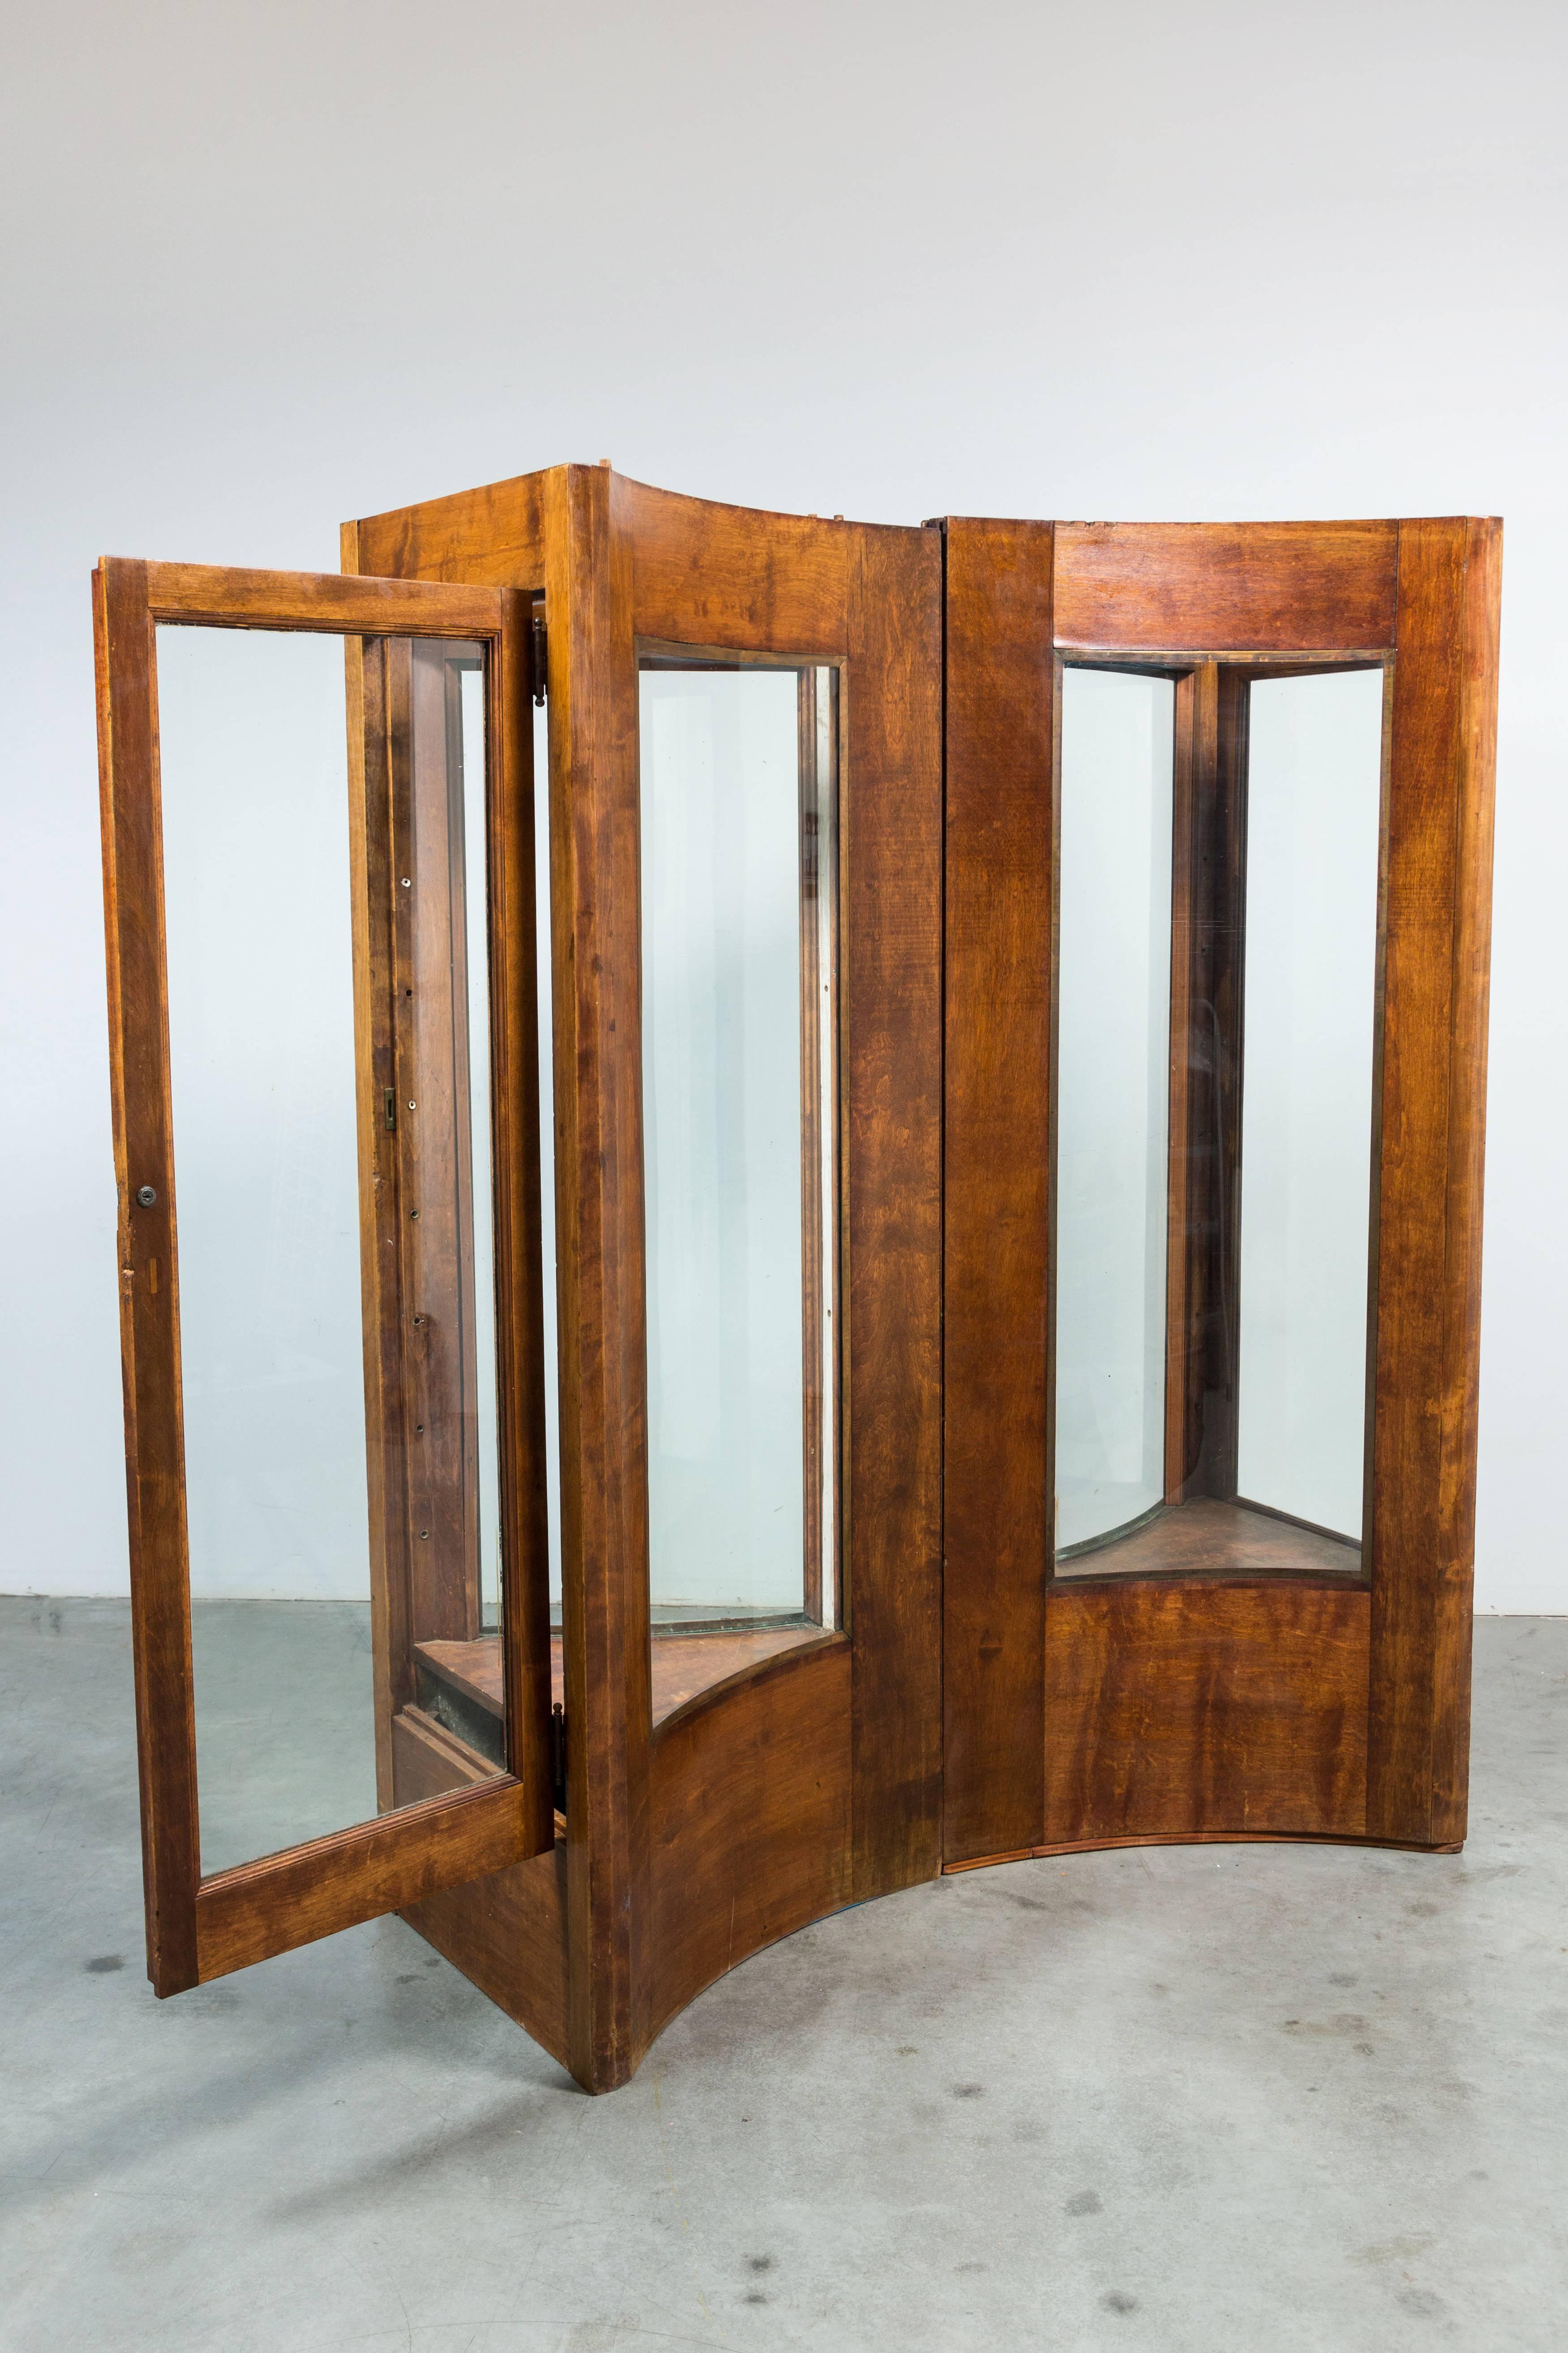 Fantastic oak display cases. Join together to form a bowtie shape. Each has one door for access and original glass shelves (not shown in images). Very solid and sturdy. Great and unusual display option with a fun history. 